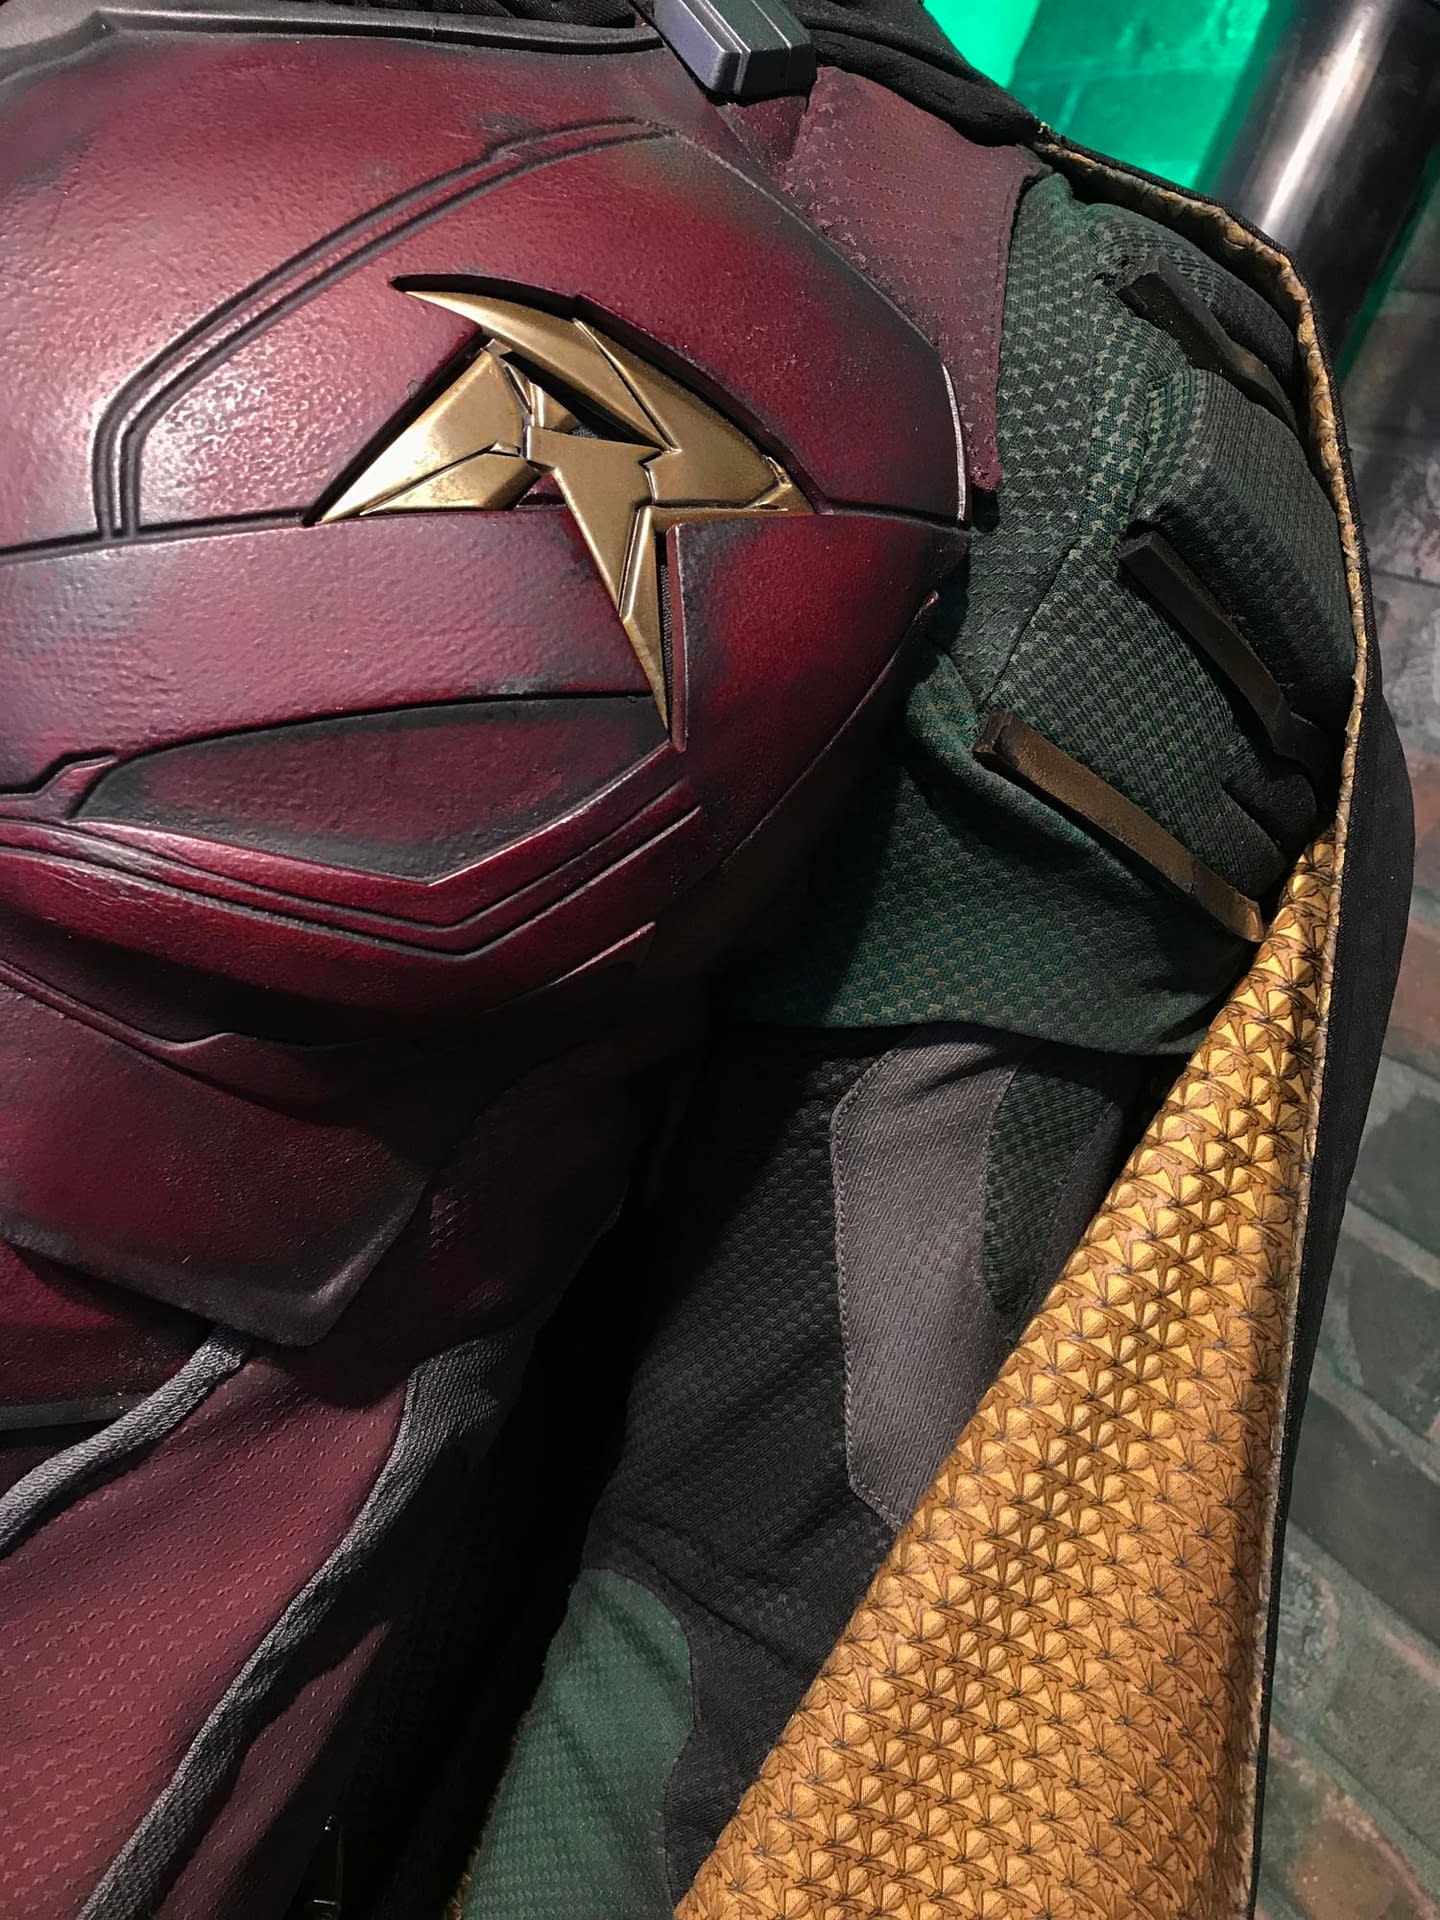 'Titans': DC Daily Offers Best Look Yet at Robin's Suit, Amazing Details